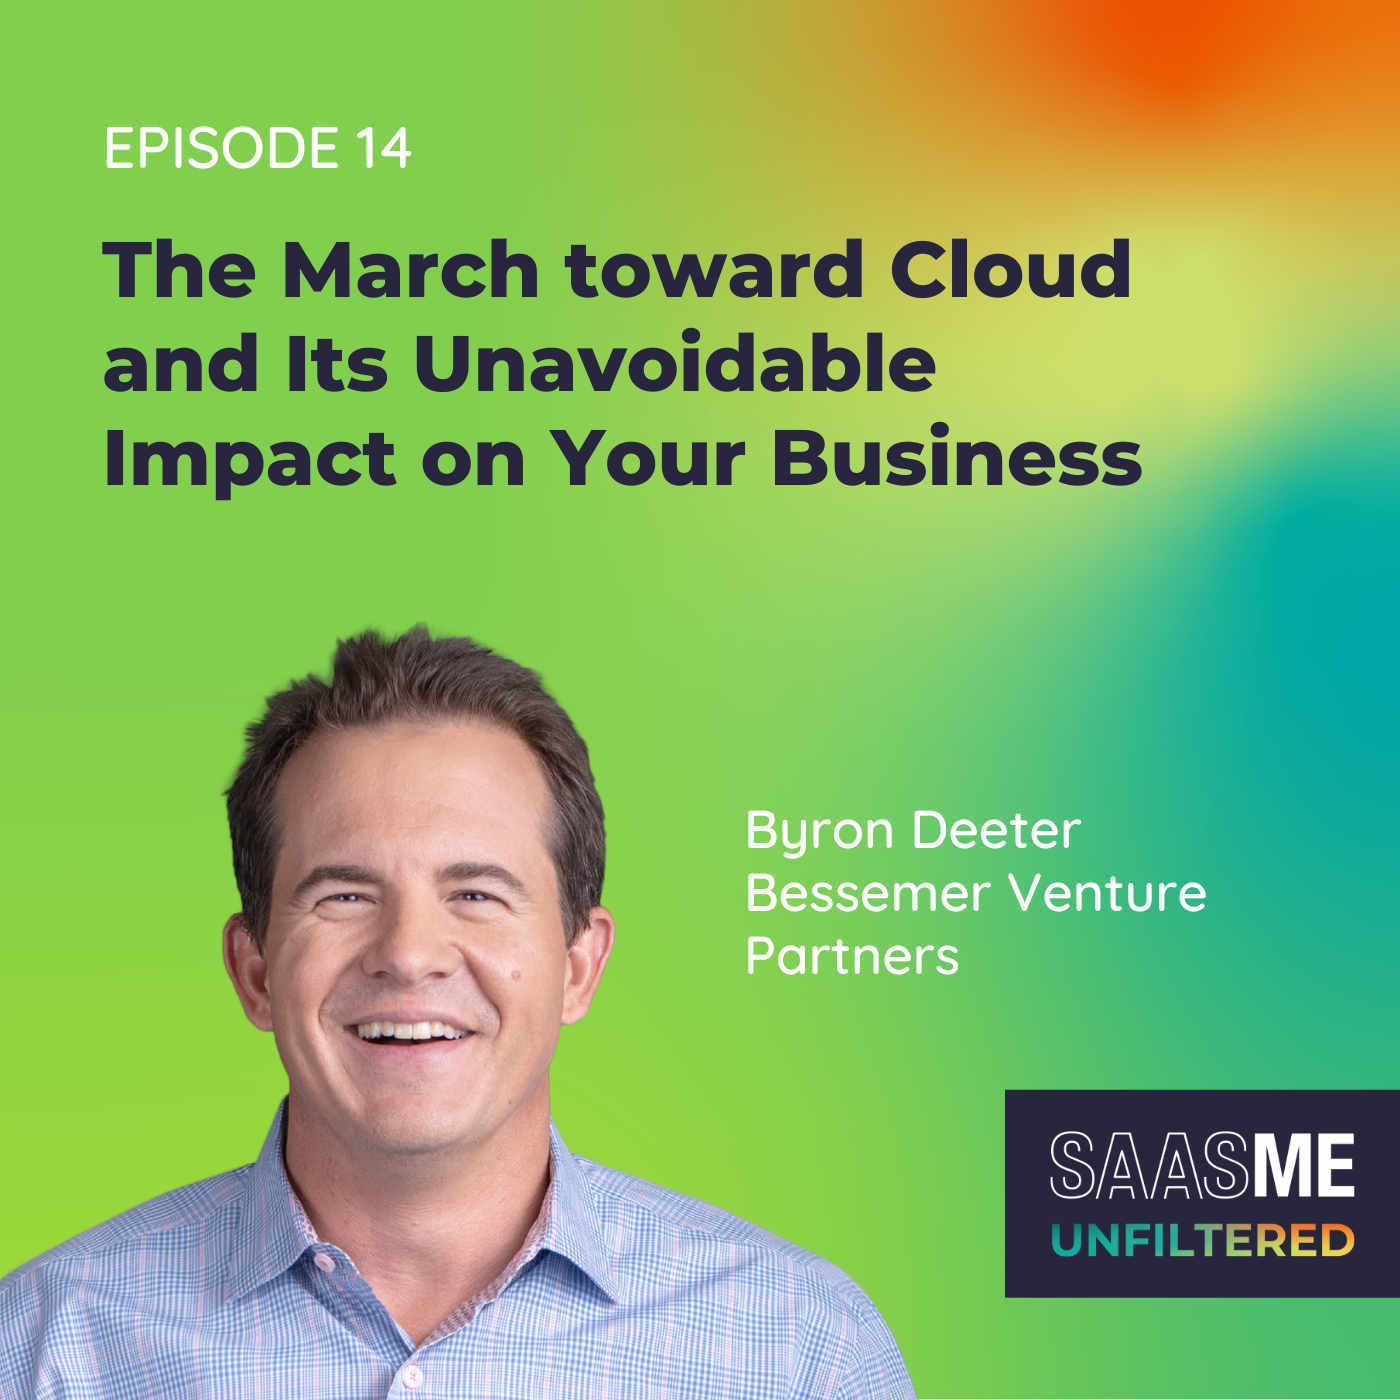 Byron Deeter: The March toward Cloud and Its Unavoidable Impact on Your Business